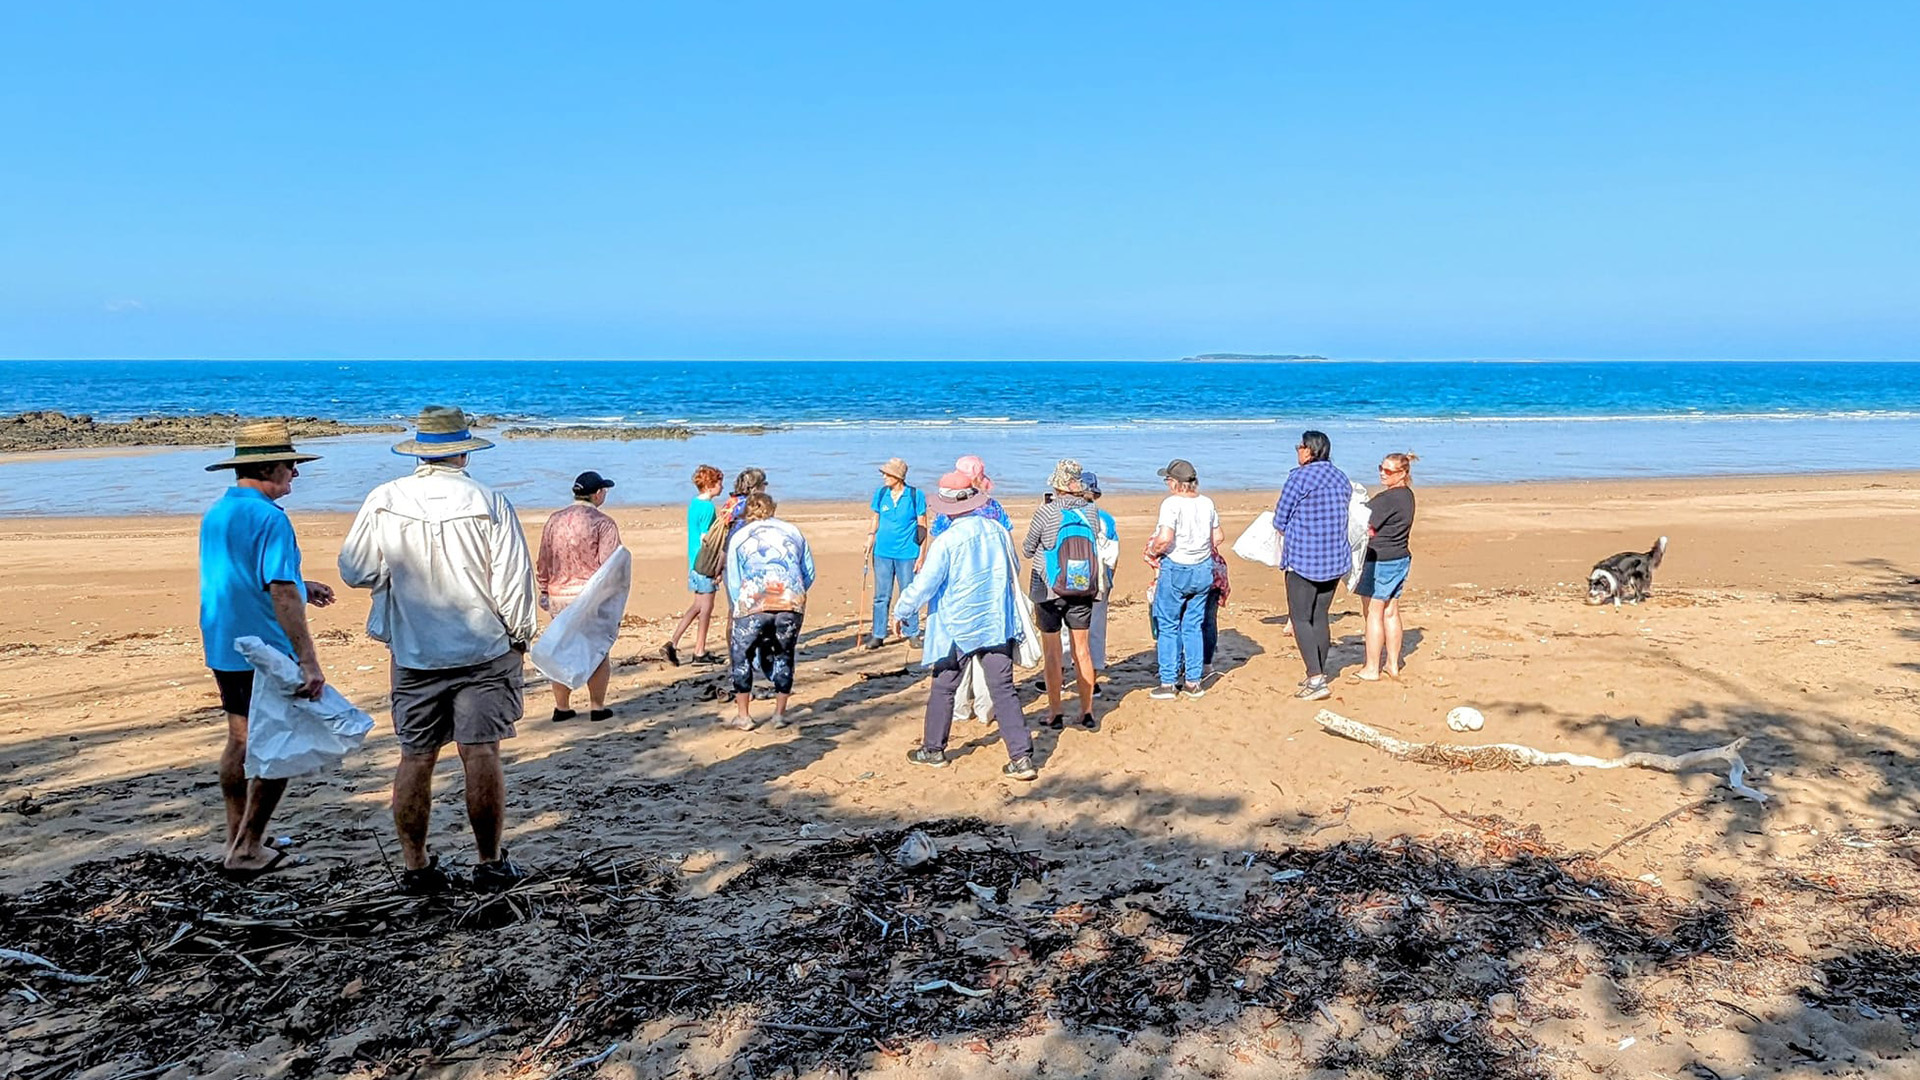 A group of people gathered on a beach.